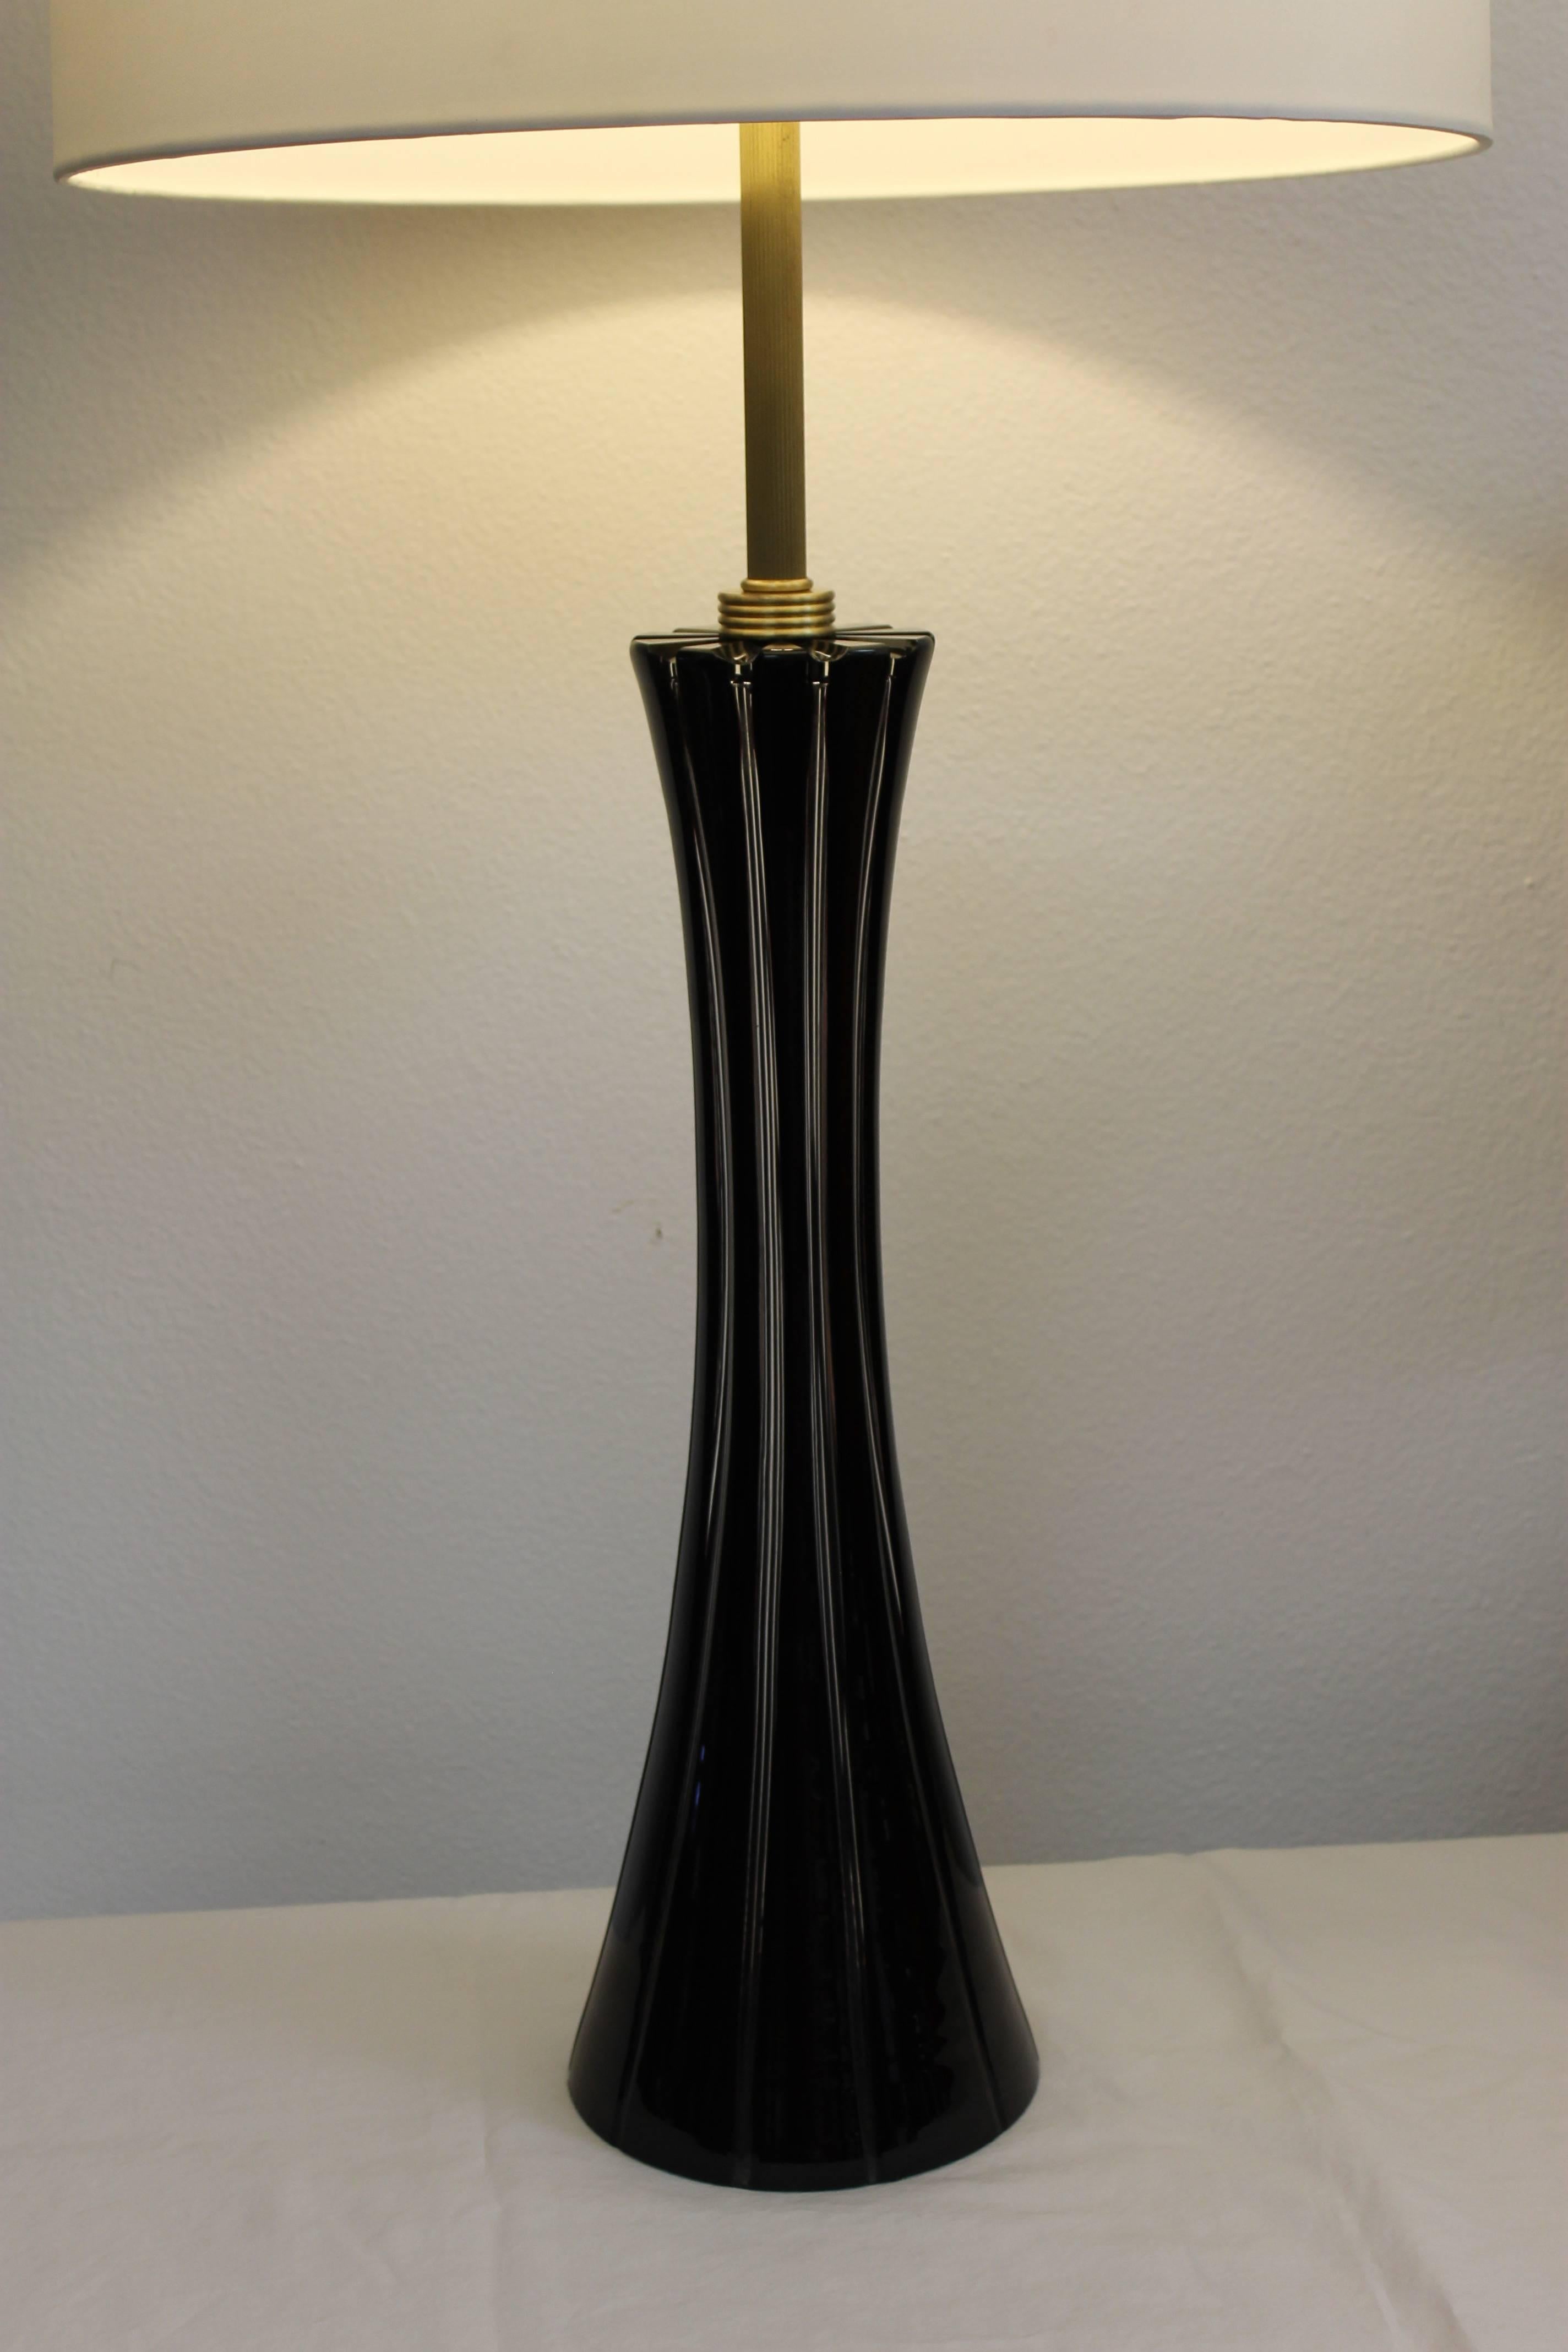 Black and clear glass lamp signed R.H. Lamp measures 29.5